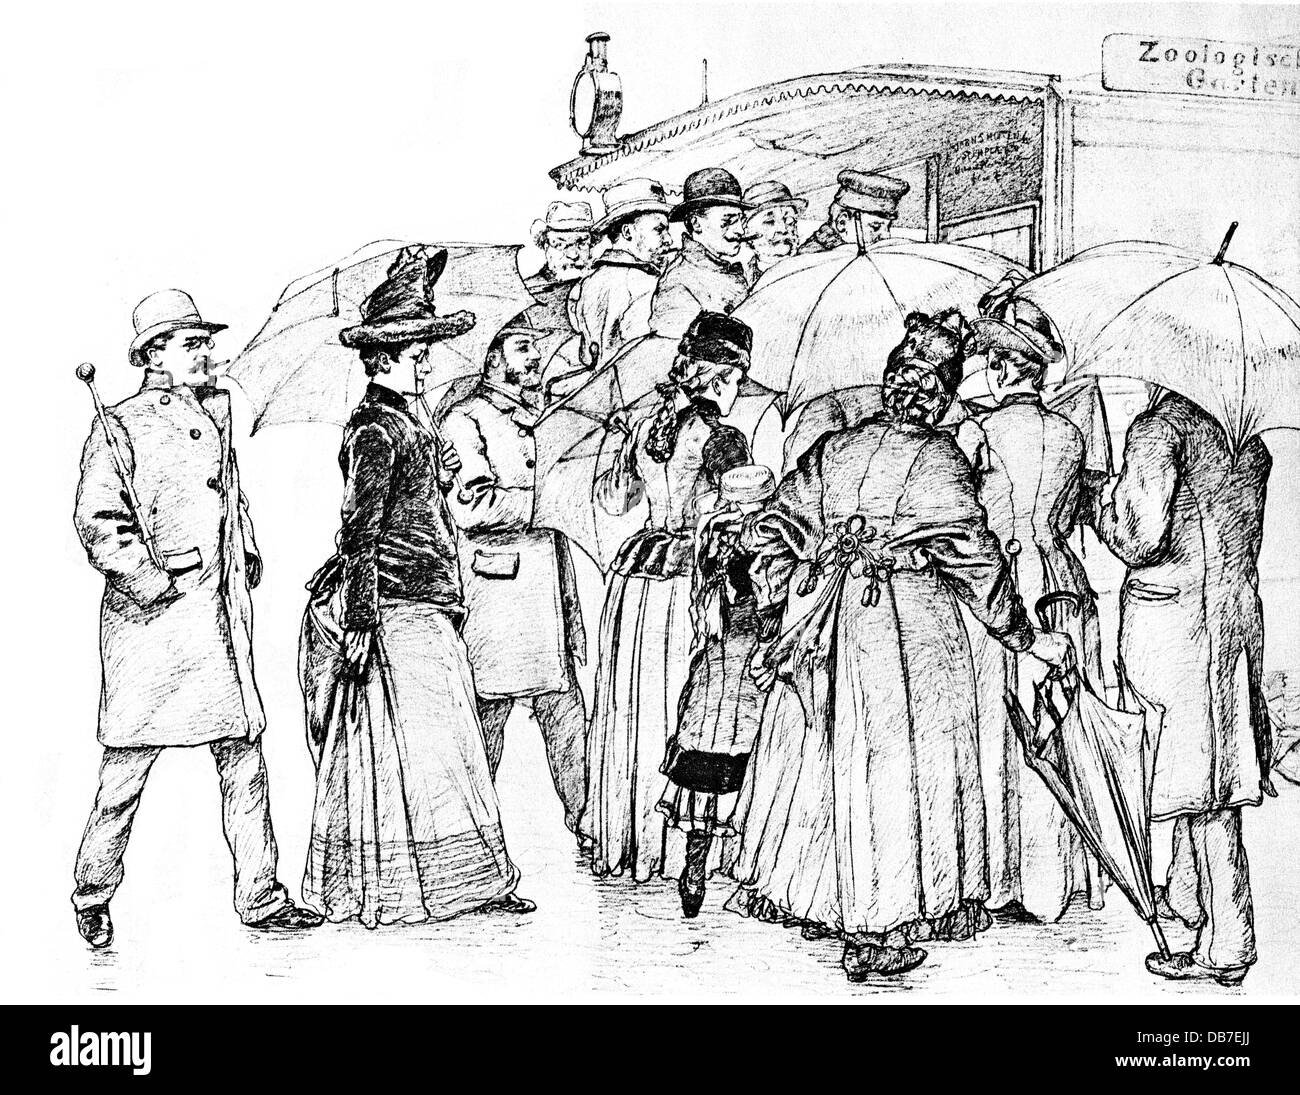 public transport, bus, passengers at the 'Zoologischer Garten' (Zoological Garden), bus stop, Berlin, drawing, circa 1910, Additional-Rights-Clearences-Not Available Stock Photo